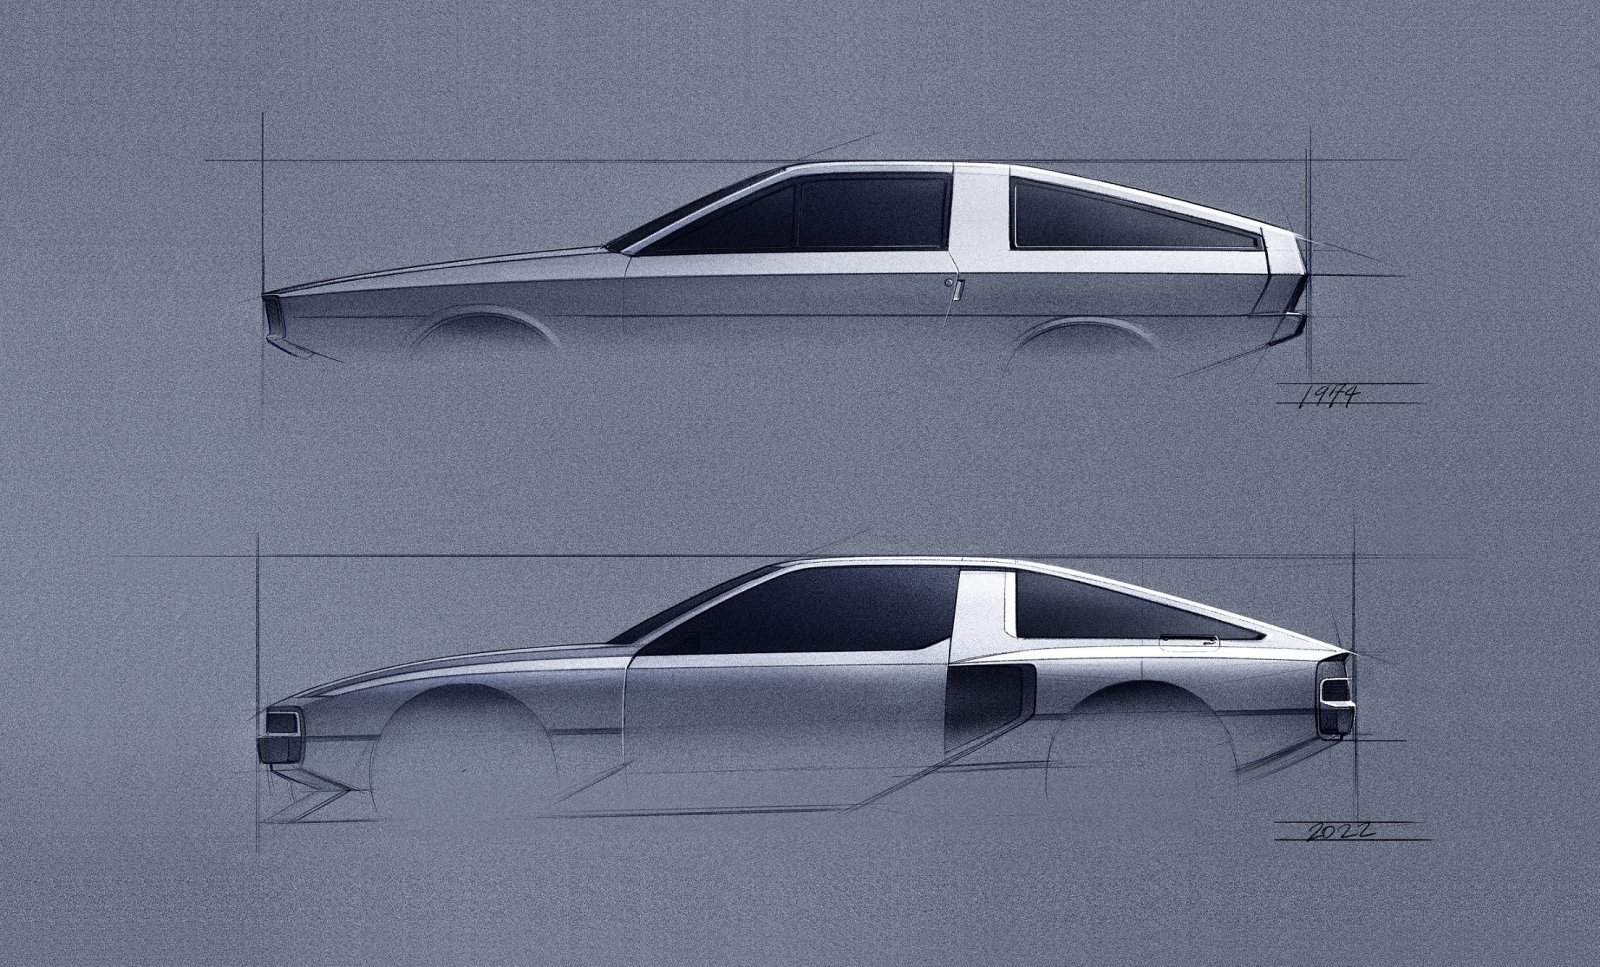 Image 3 - (Sketch) Pony Coupe Concept and N Vision 74 (created by Hyundai Design).jpg